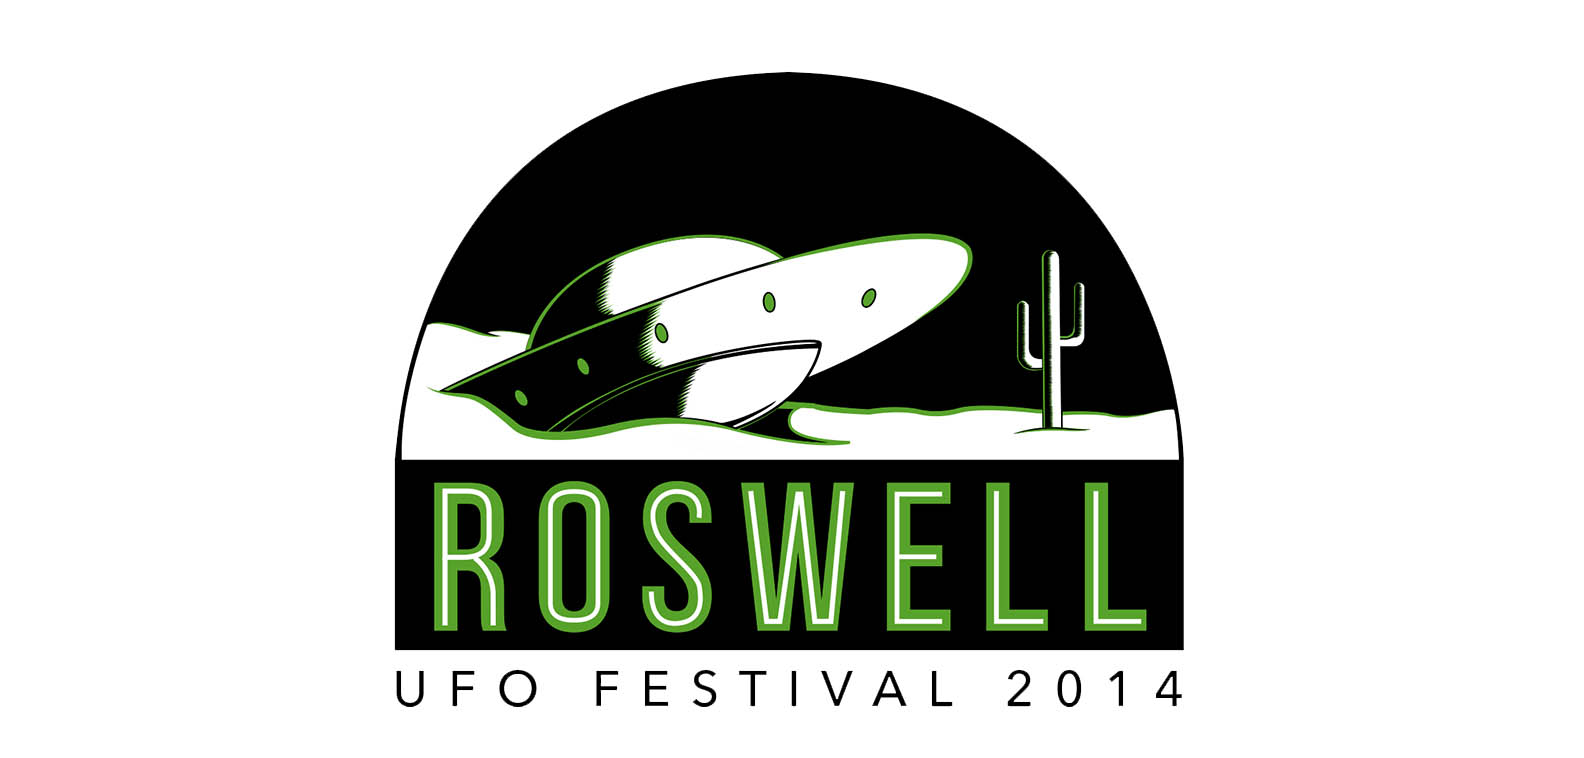 roswell_logo_page.jpg